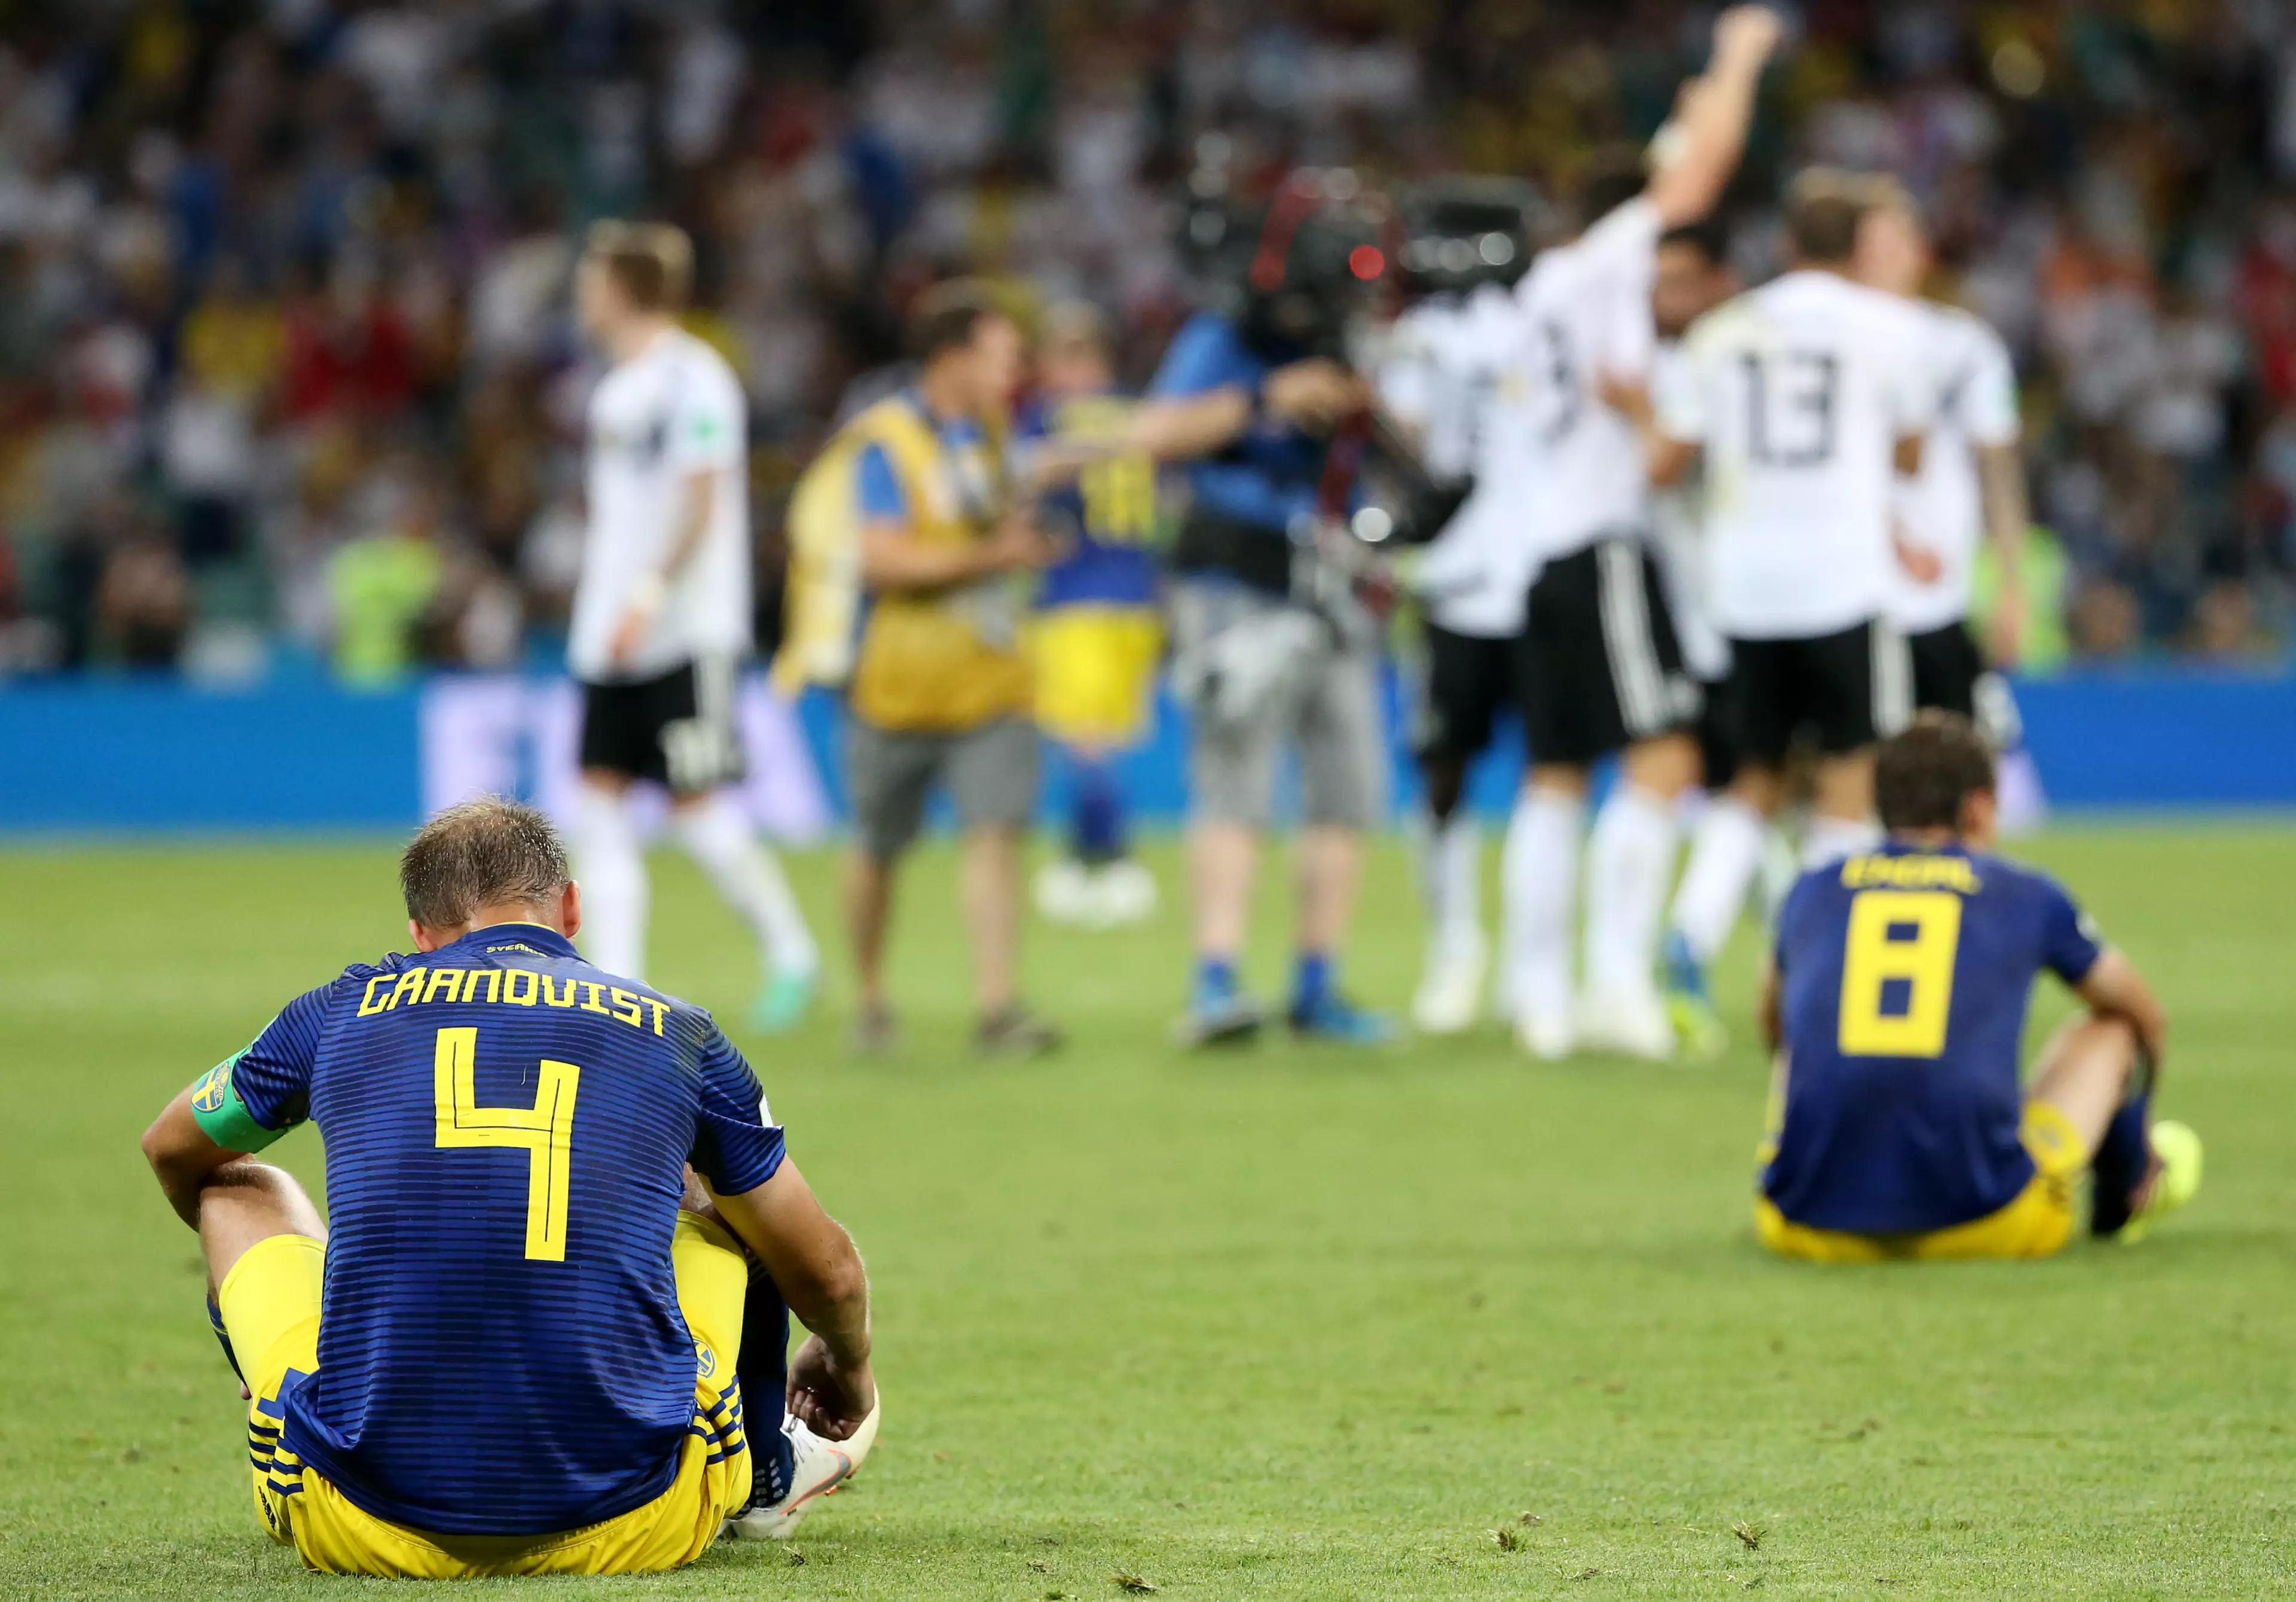 Sweden side look on after losing it late to Germany. Image: PA Images